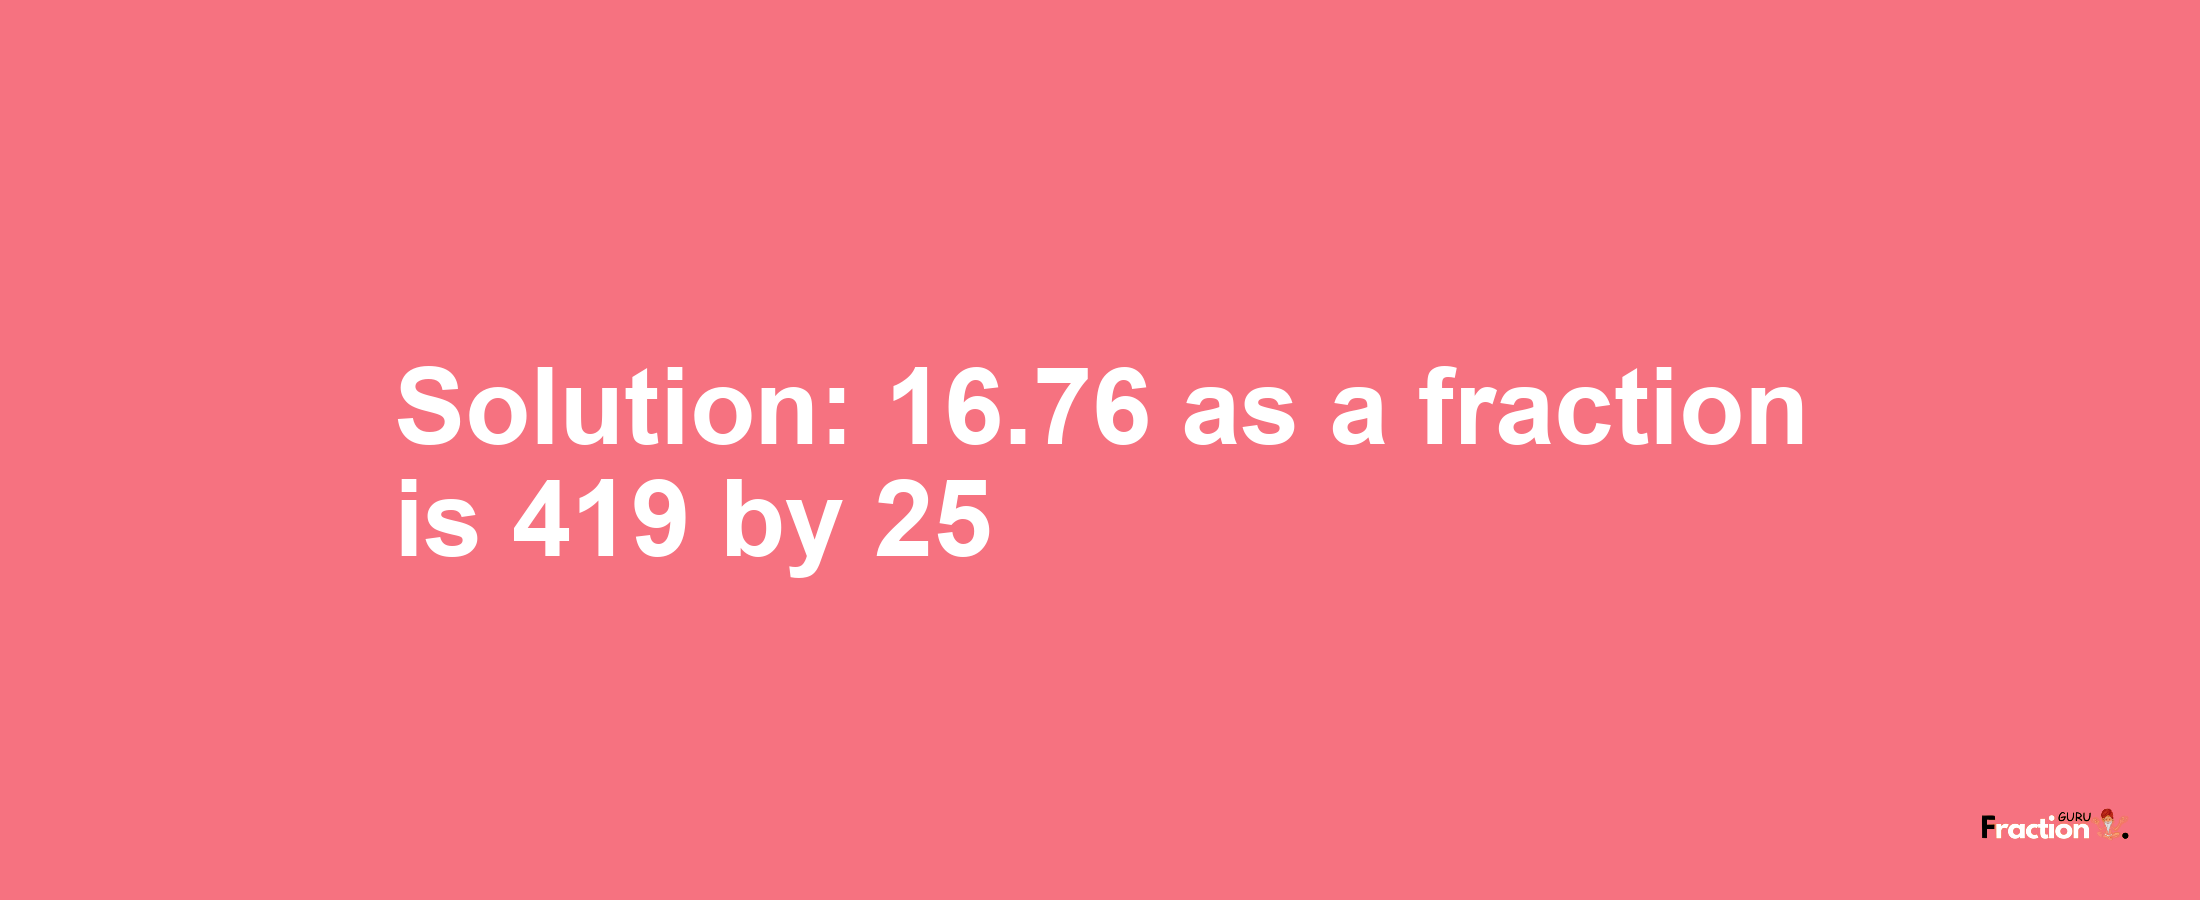 Solution:16.76 as a fraction is 419/25